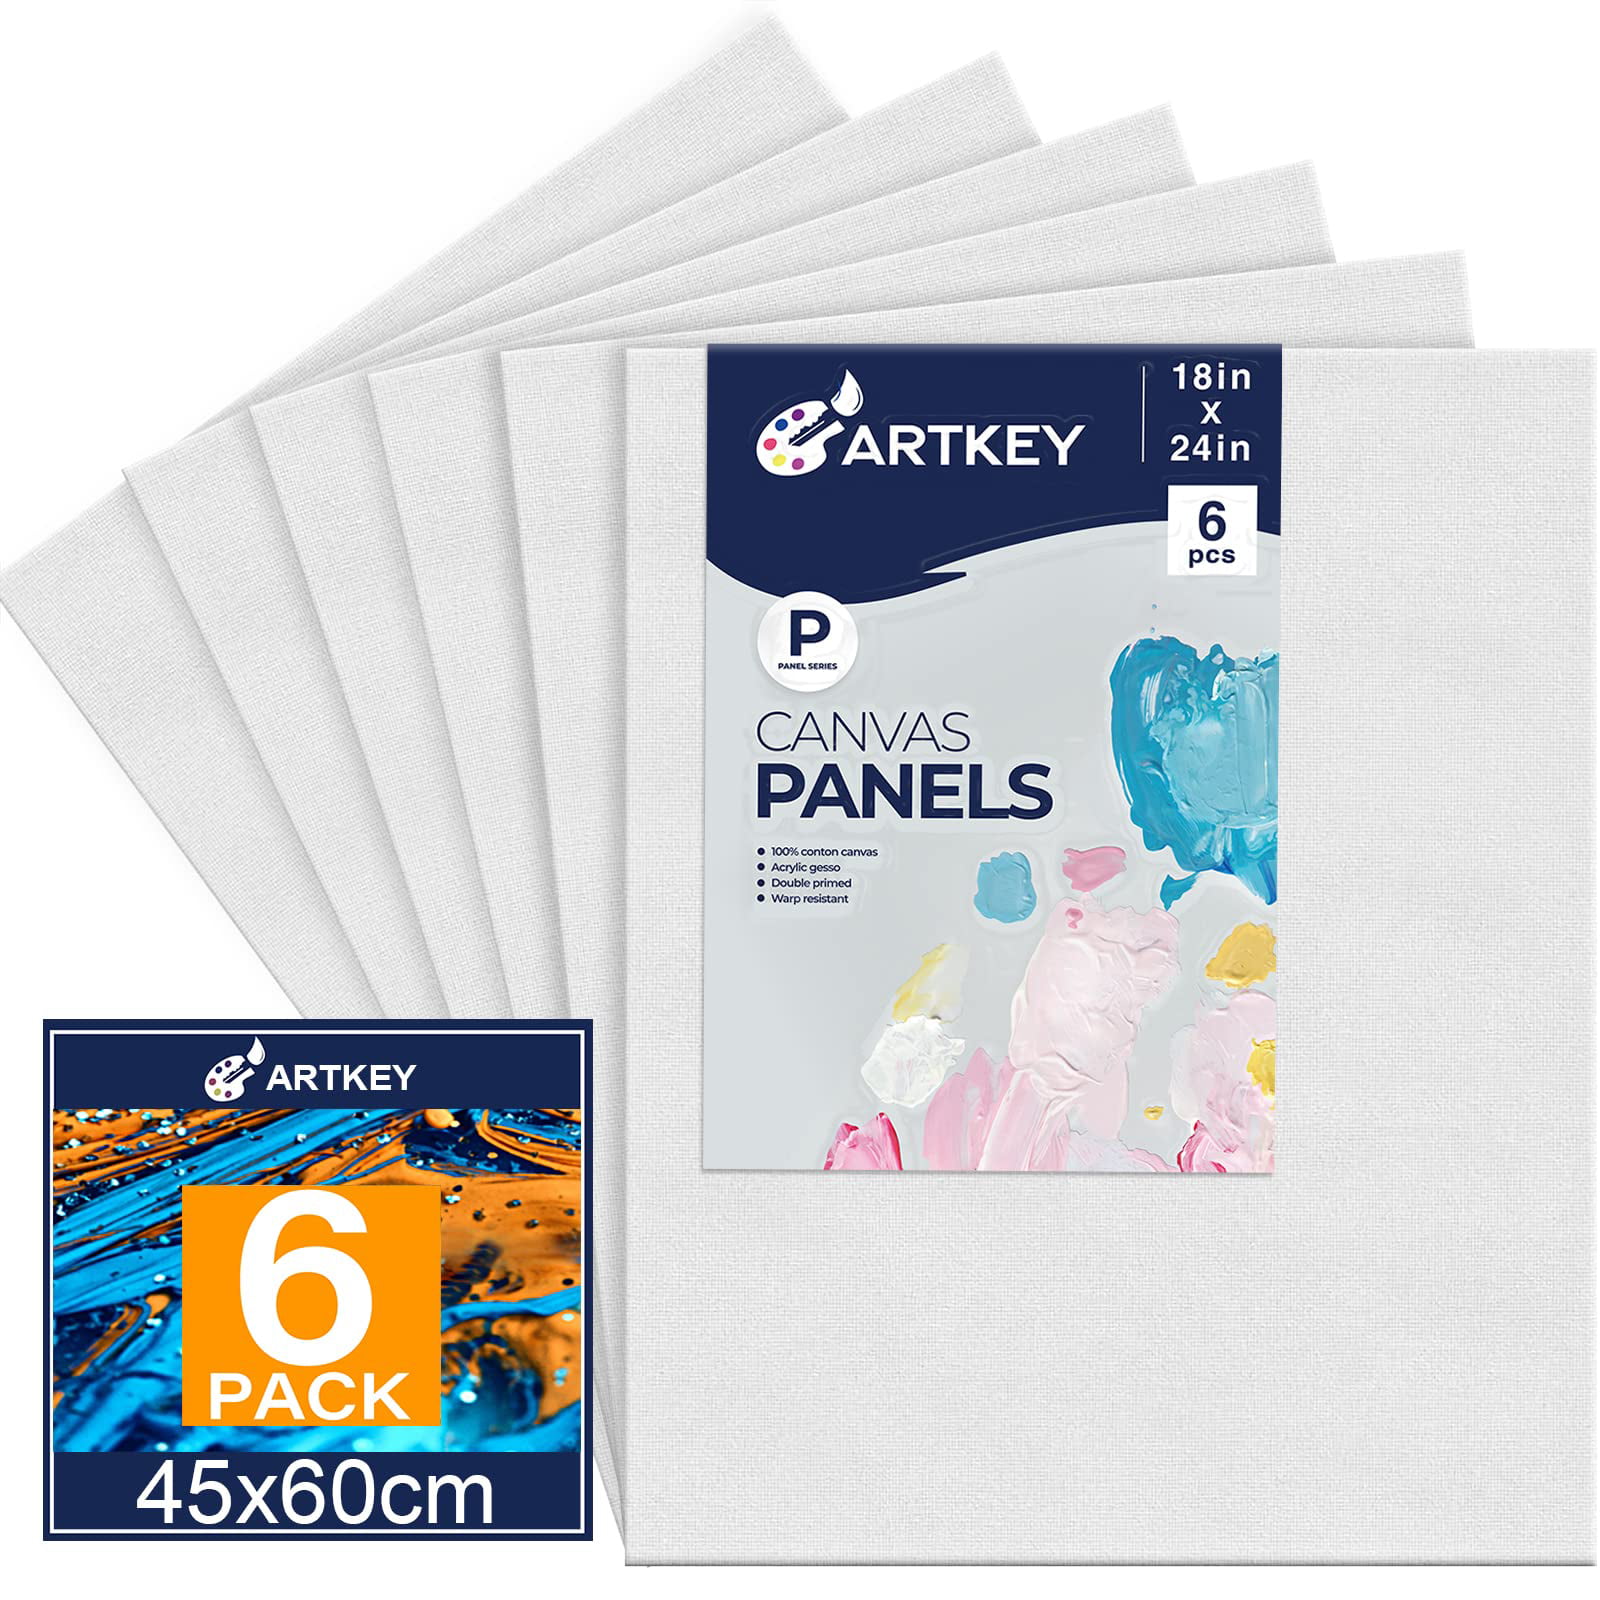  4 X 4 White Blank Canvas Panel Boards, Pack of 20, Primed,  100% Cotton for Acrylic Painting, Canvases for Hobby Painters &  Beginners/4x4, 10 Pack